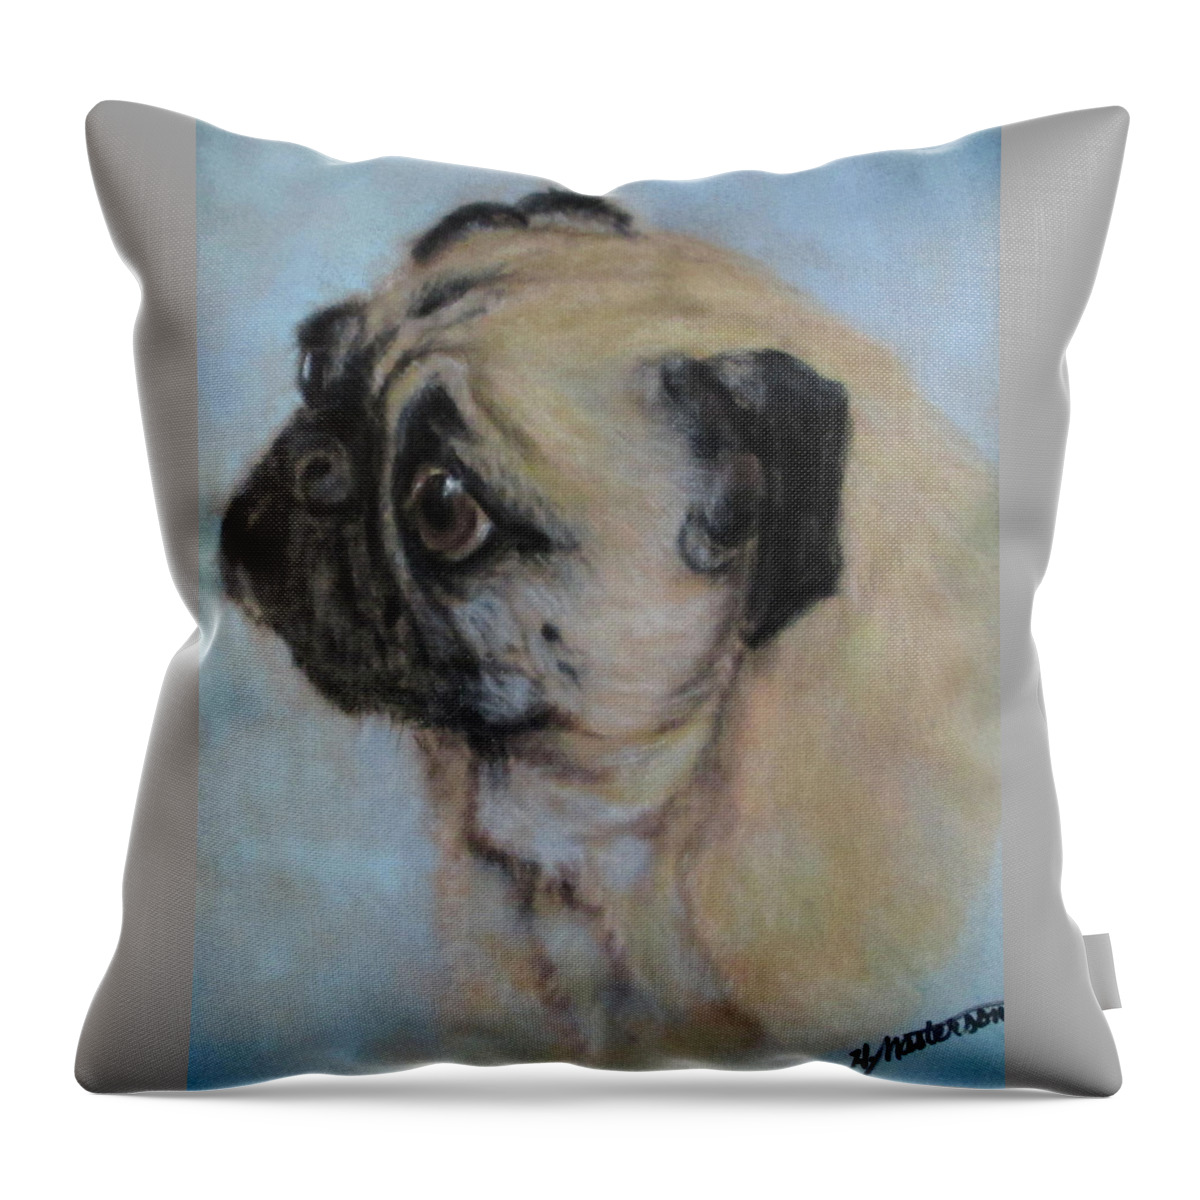 Dog Throw Pillow featuring the pastel Pug's Worried Look by Harriett Masterson